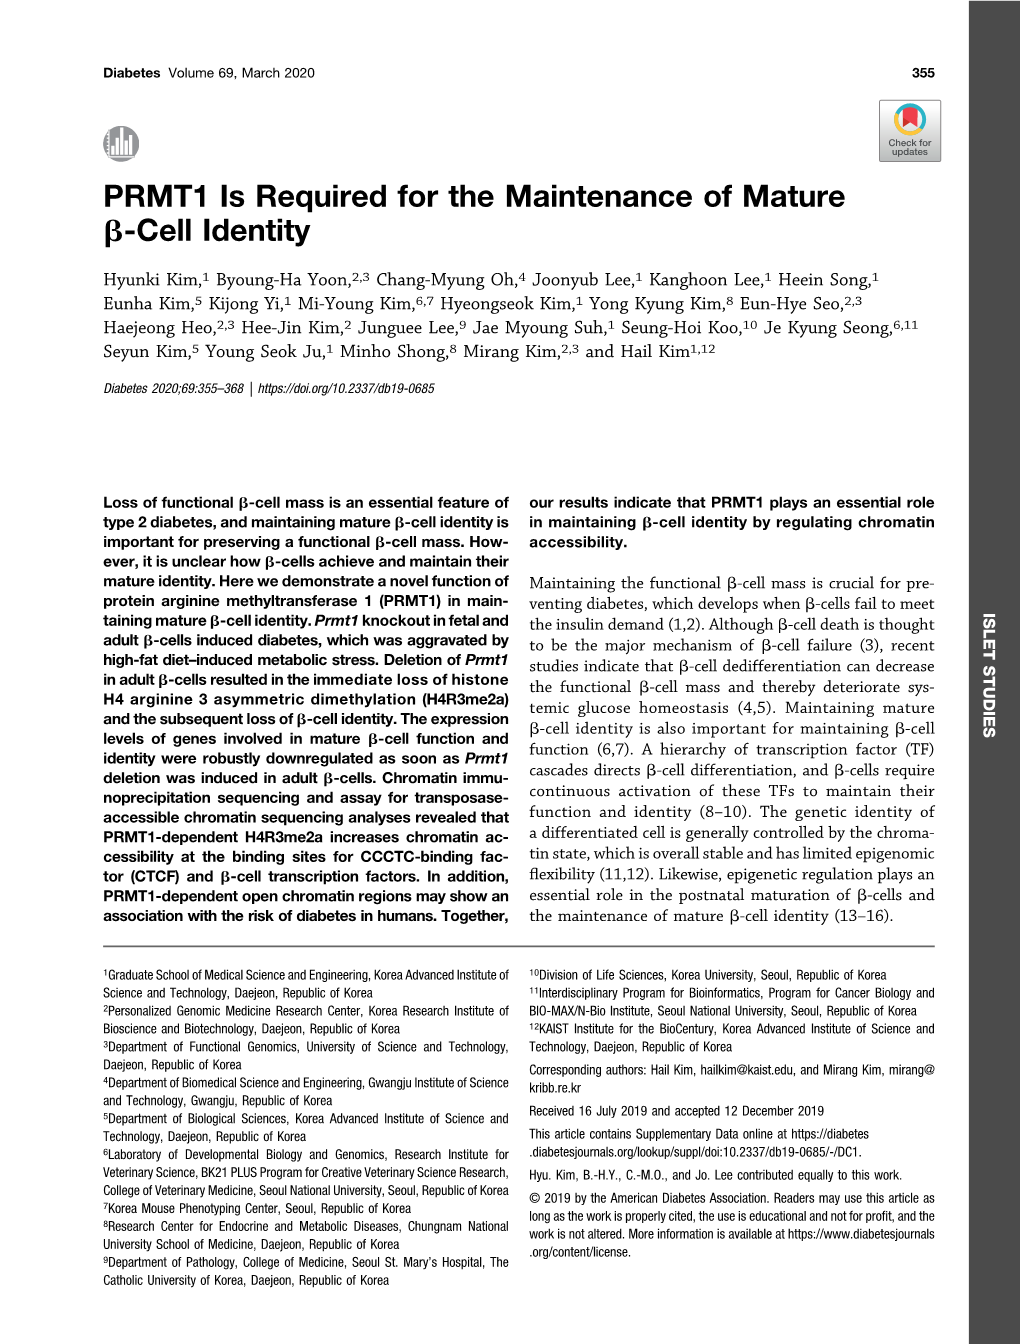 PRMT1 Is Required for the Maintenance of Mature Β-Cell Identity